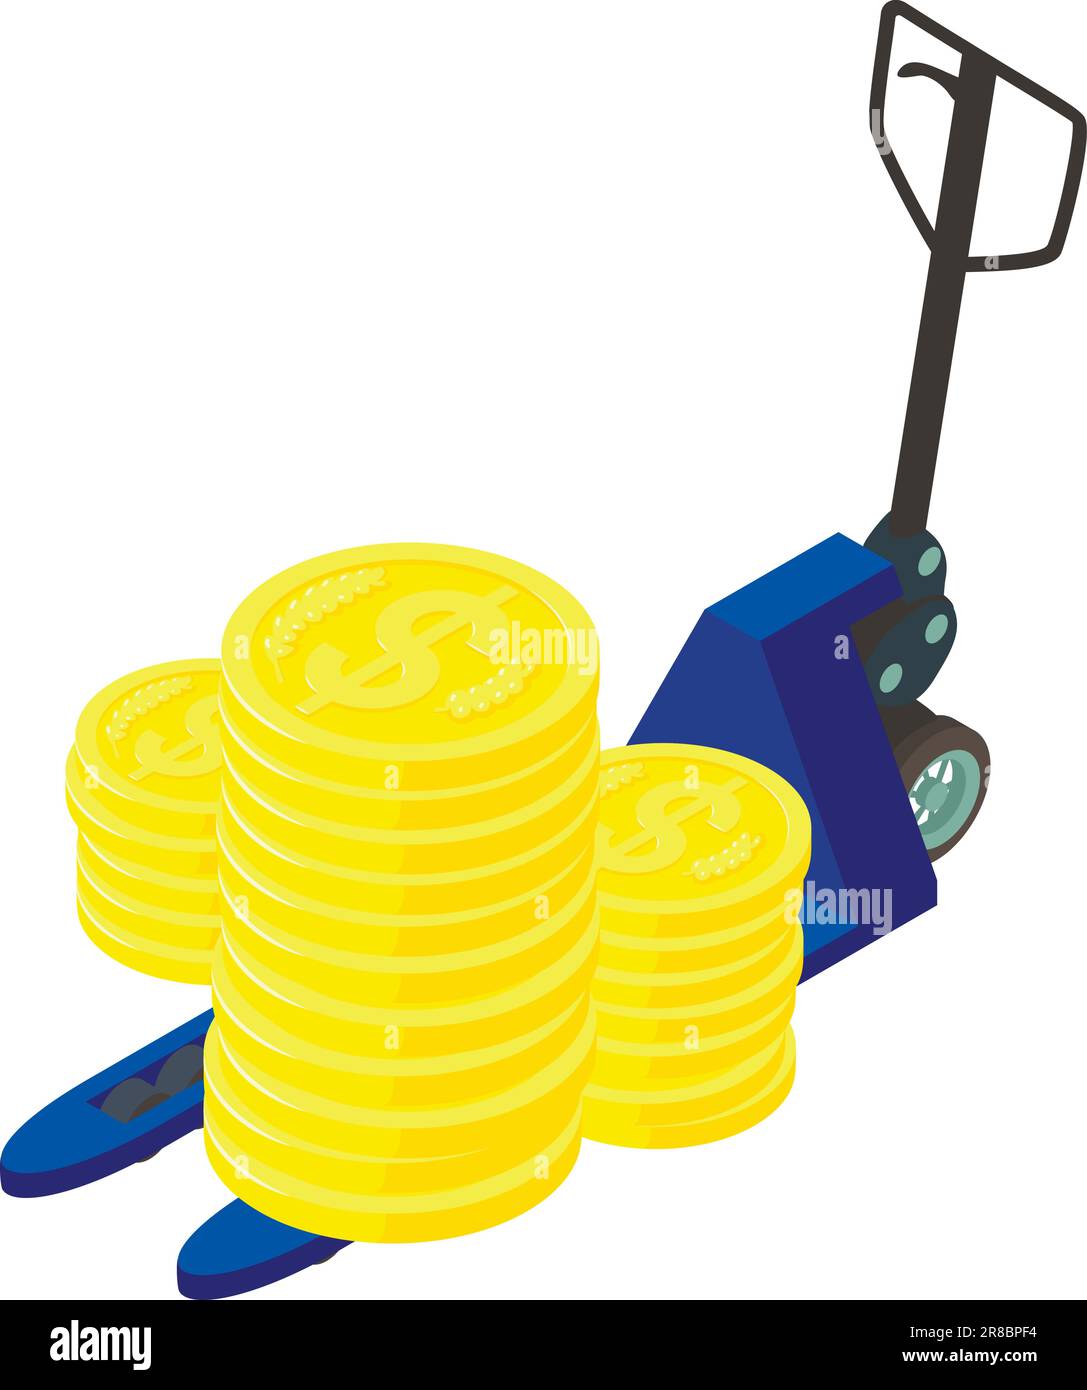 Warehouse shipping icon isometric vector. Big golden coin stack on hand forklift. Logistic concept, warehousing service Stock Vector